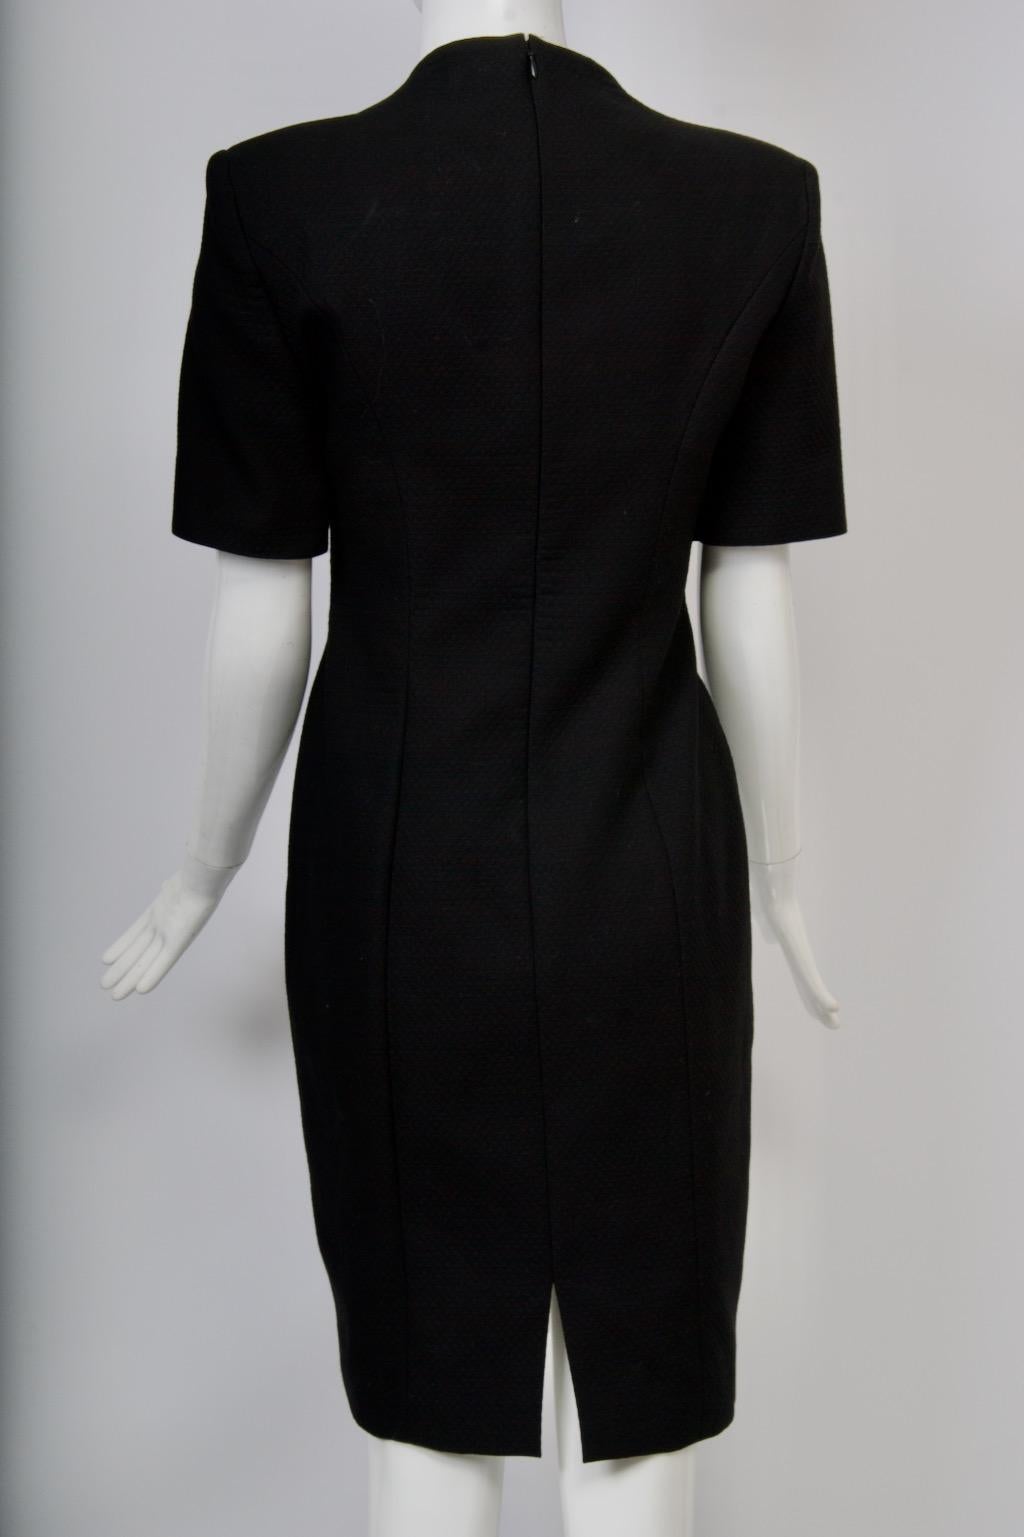 Tom and Linda Platt Black and White Dress In Excellent Condition For Sale In Alford, MA